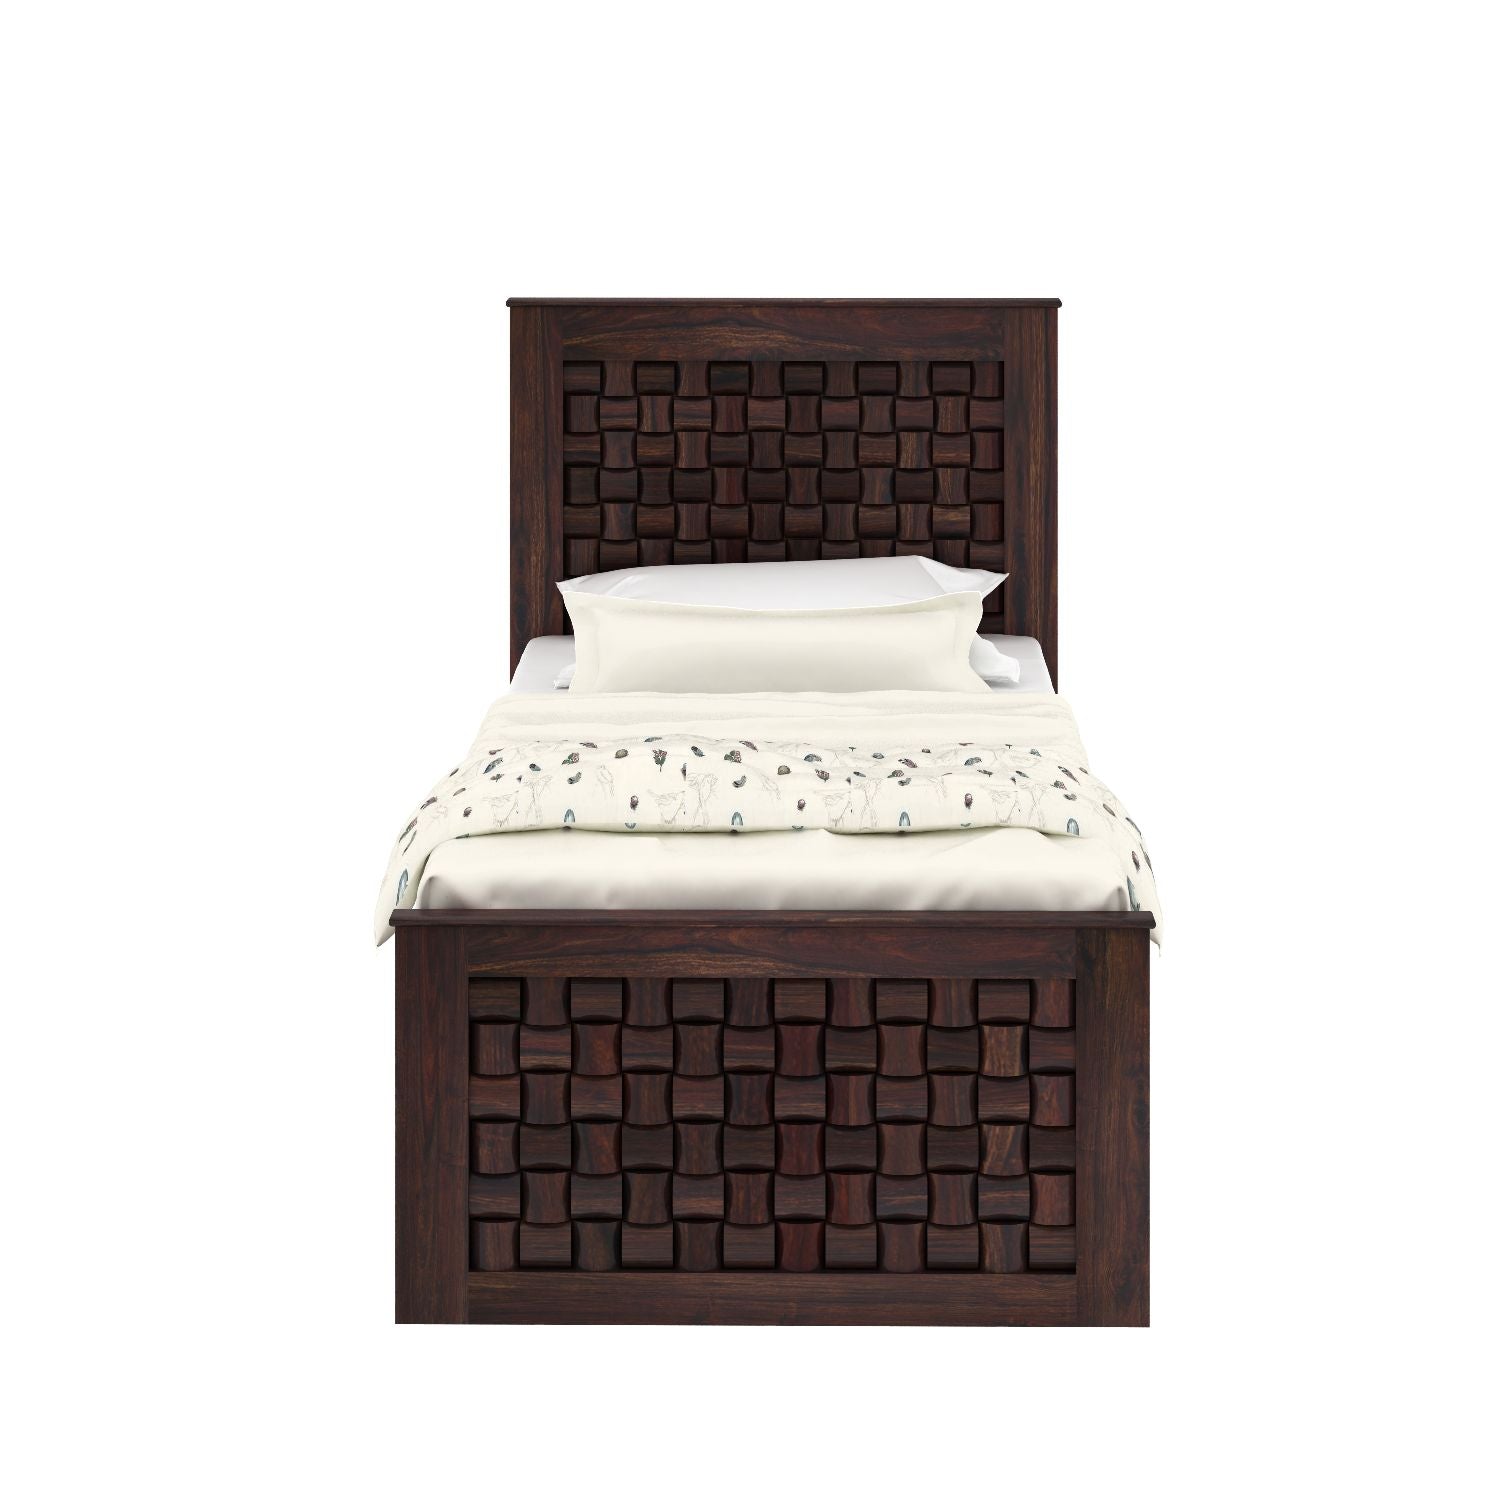 Olivia Solid Sheesham Wood Single Bed With Two Drawers (Walnut Finish)